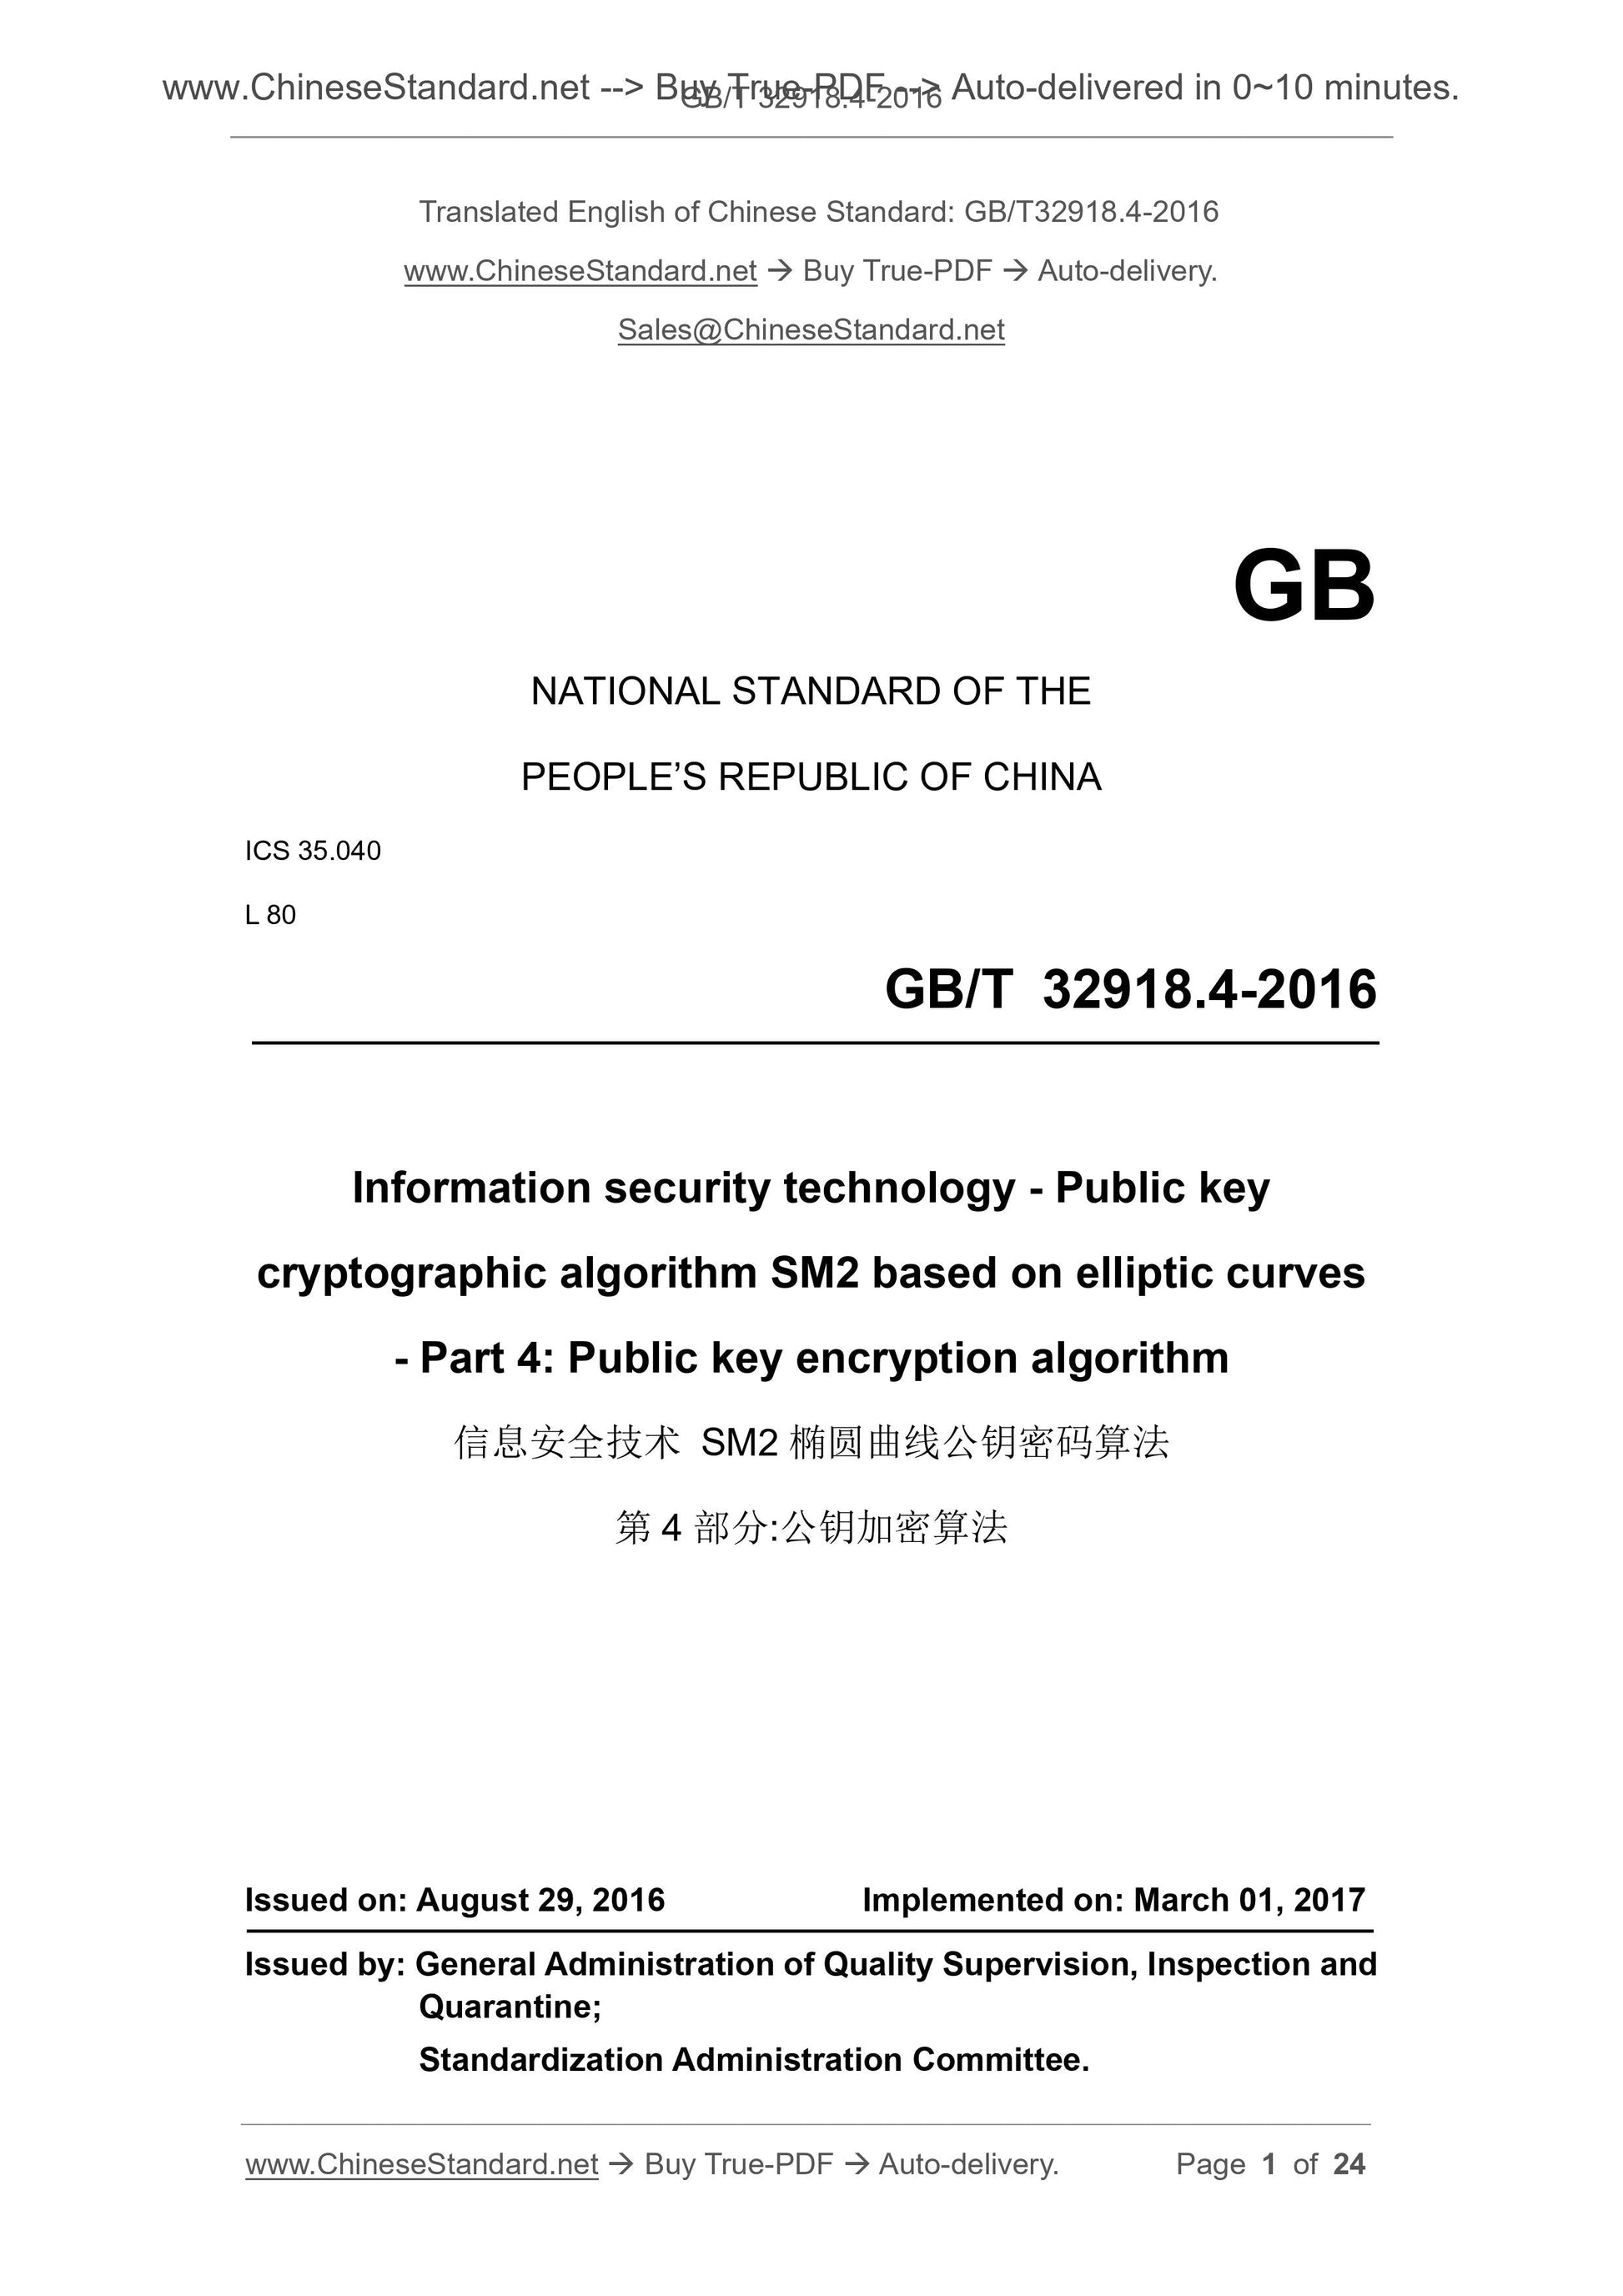 GB/T 32918.4-2016 Page 1